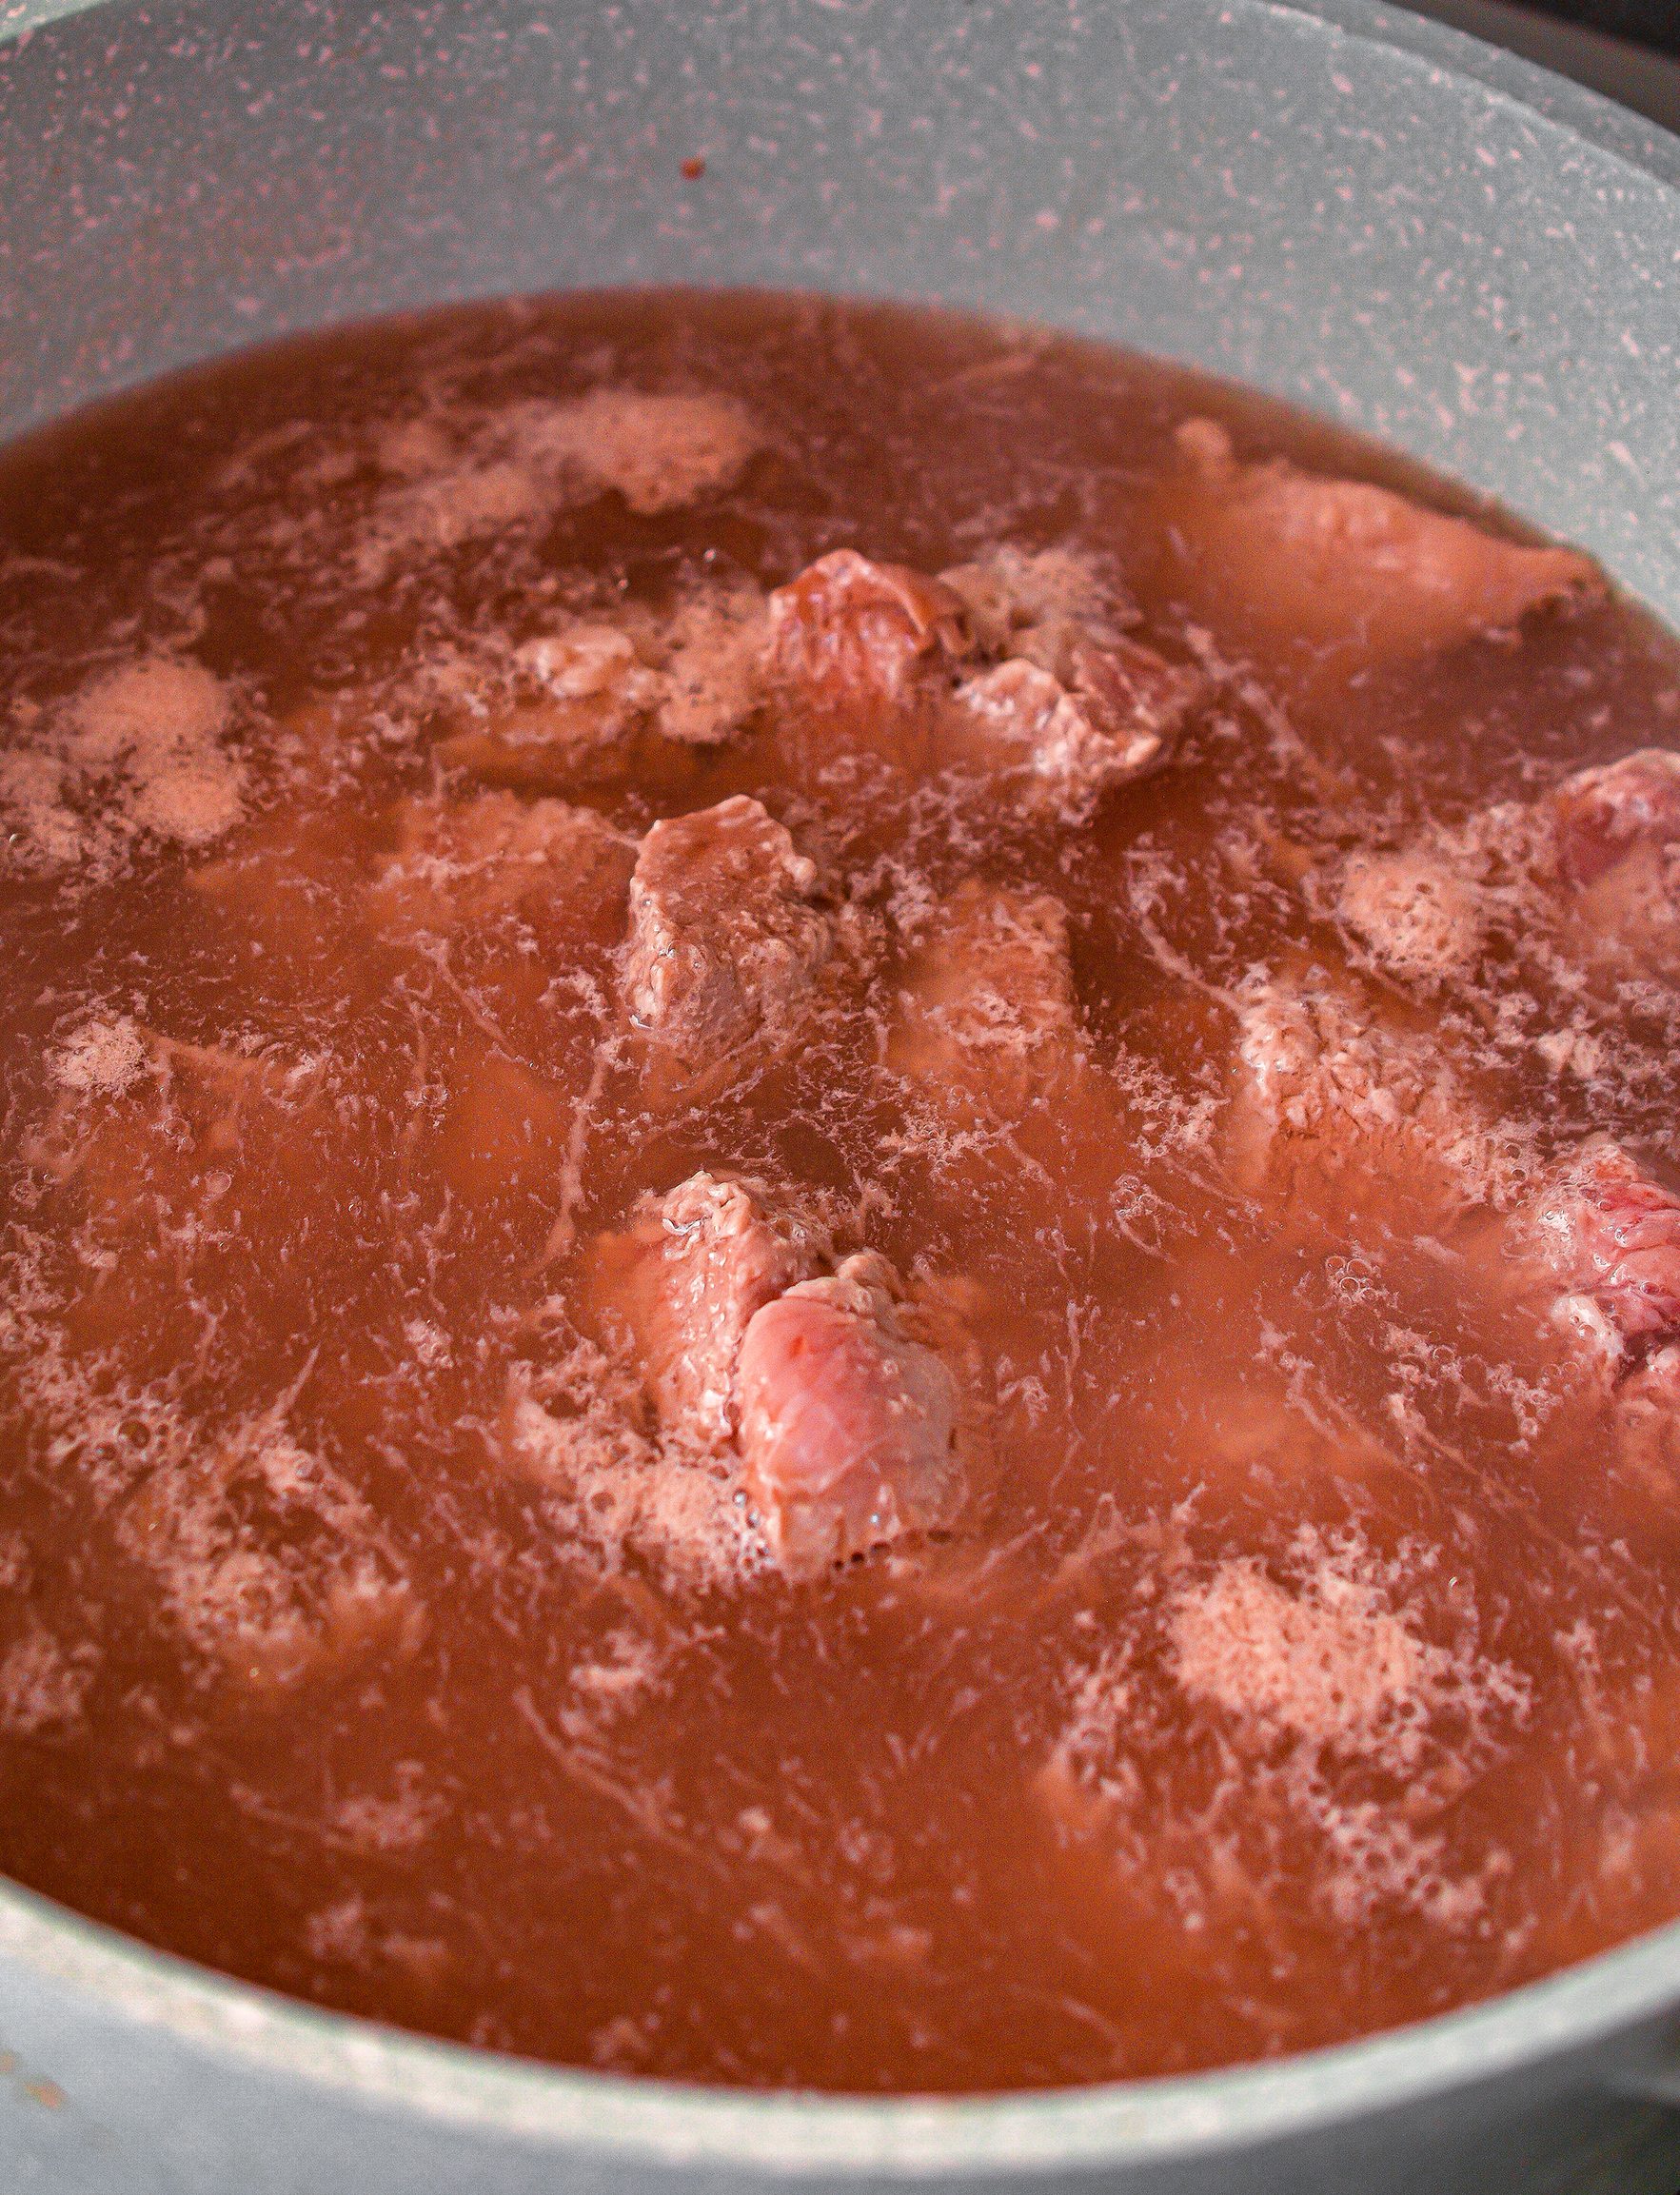  Place the beef into a pot and cover with water.